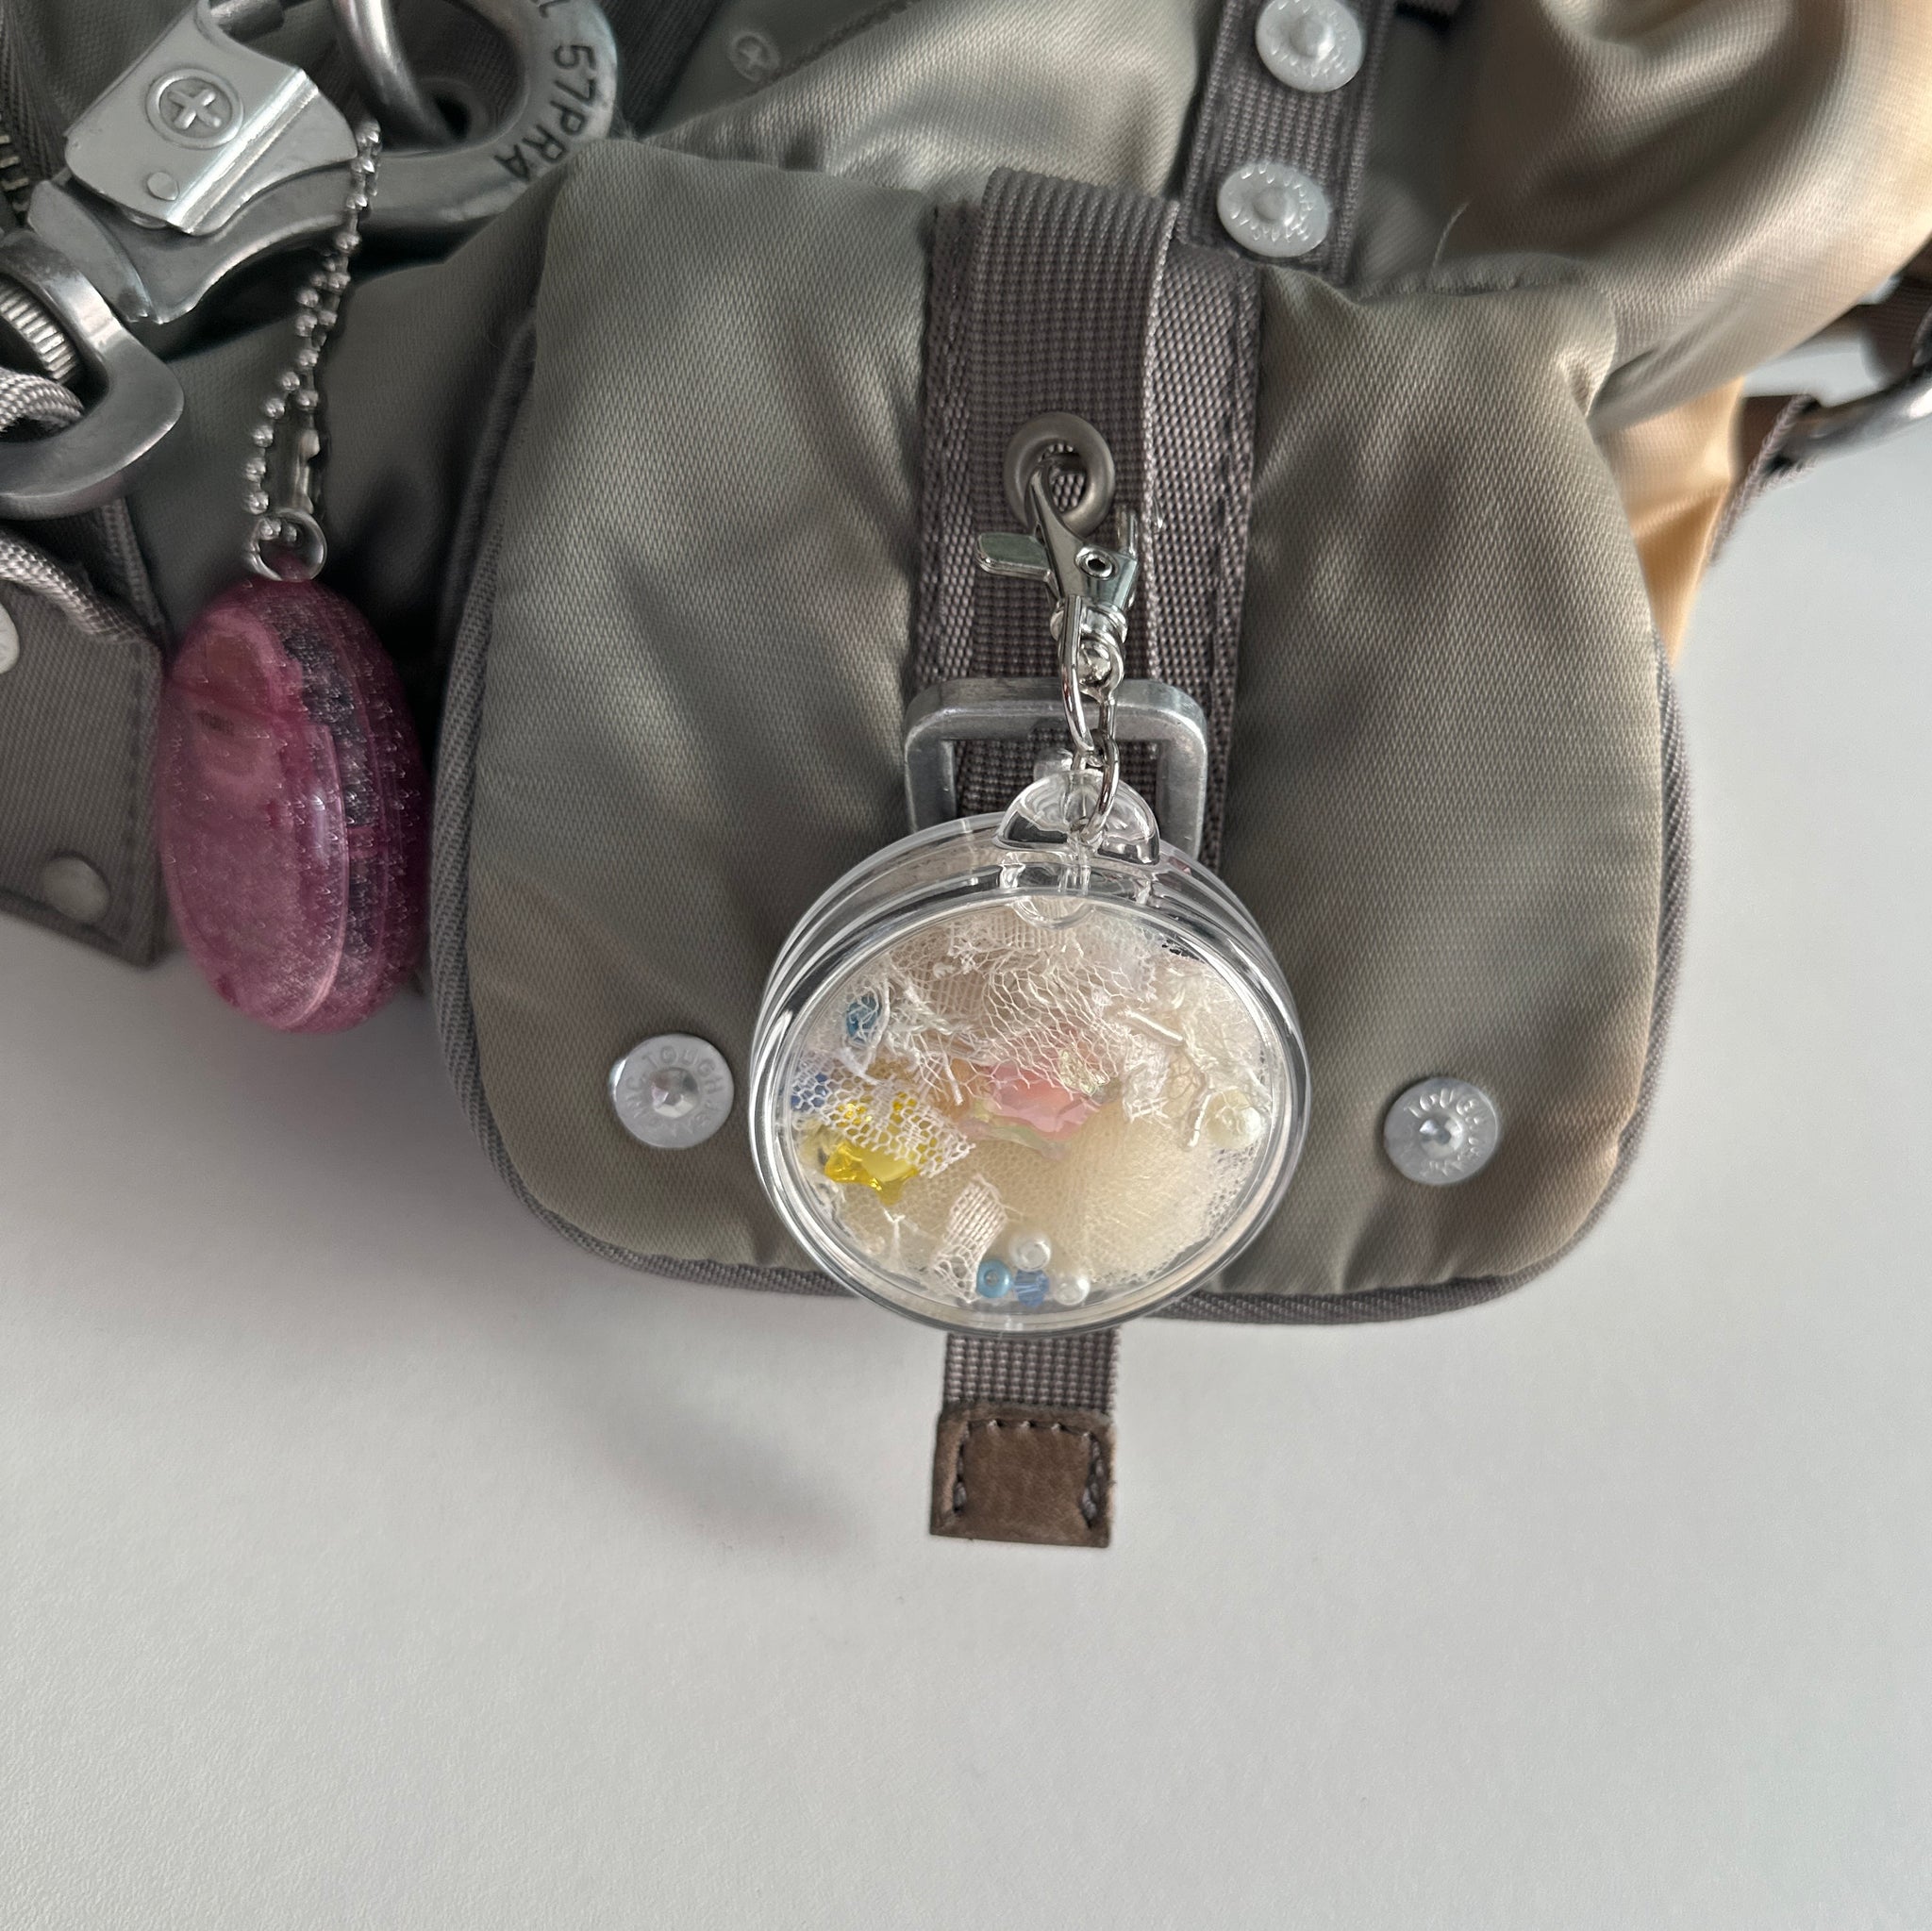 Laced with Strawberry Keychain